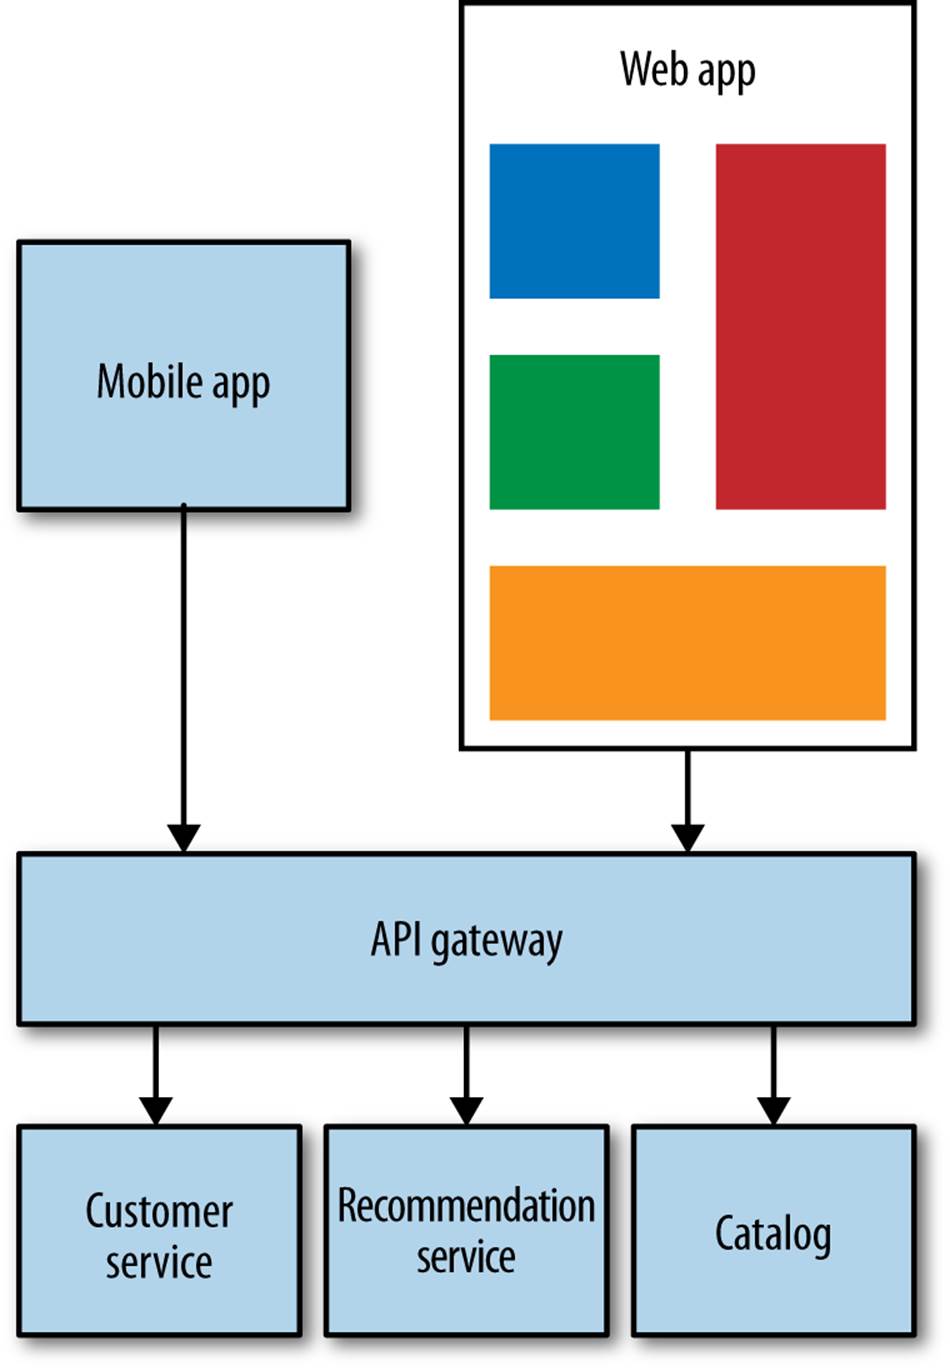 Using a single monolithic gateway to handle calls to/from UIs